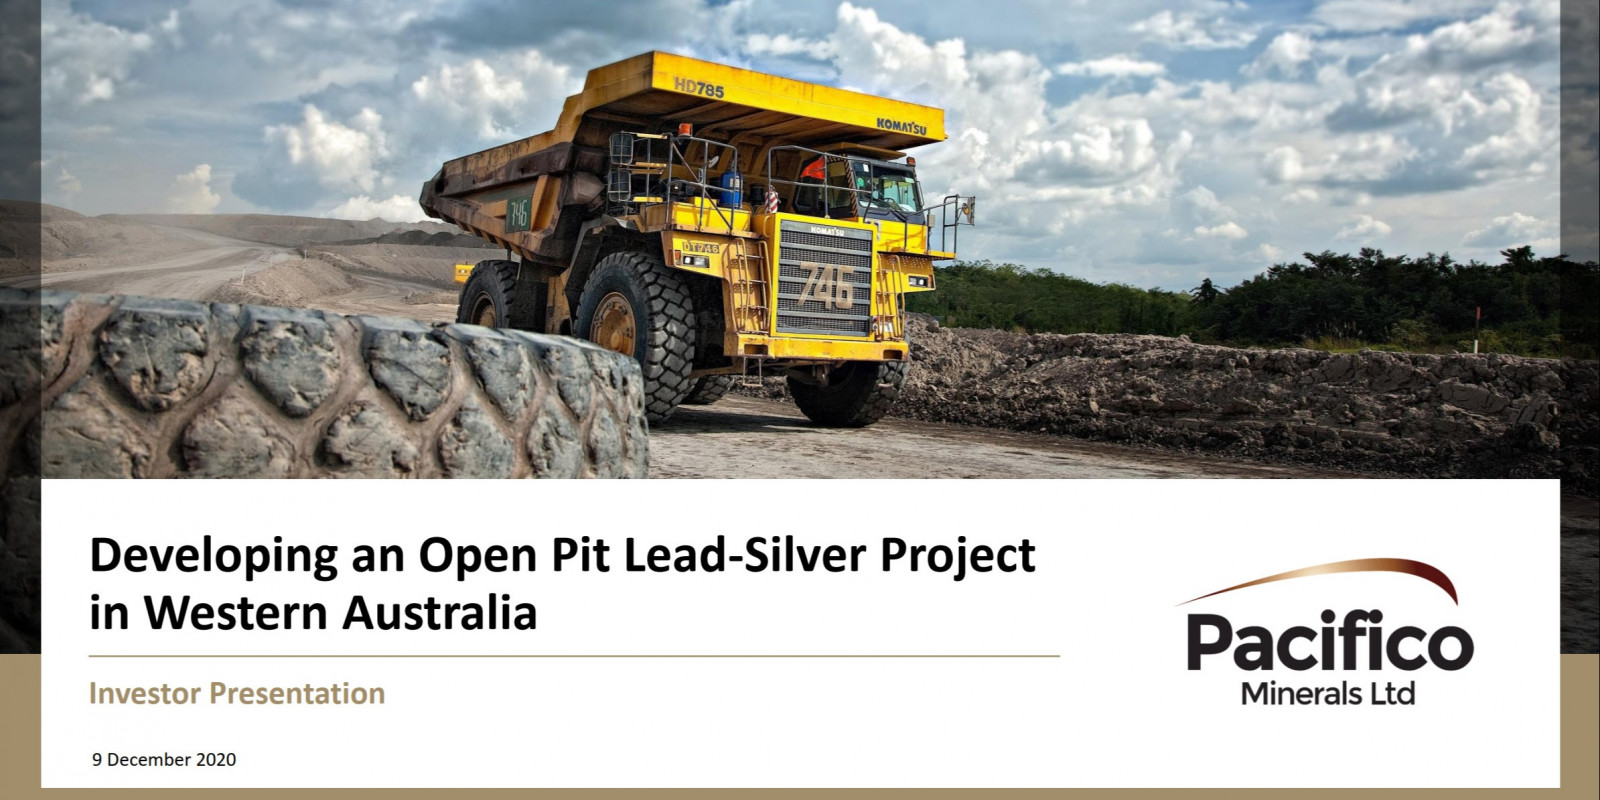 Boab Metals Ltd - Pacifico Minerals - Developing an Open Pit Lead-Silver Project in Western Australia